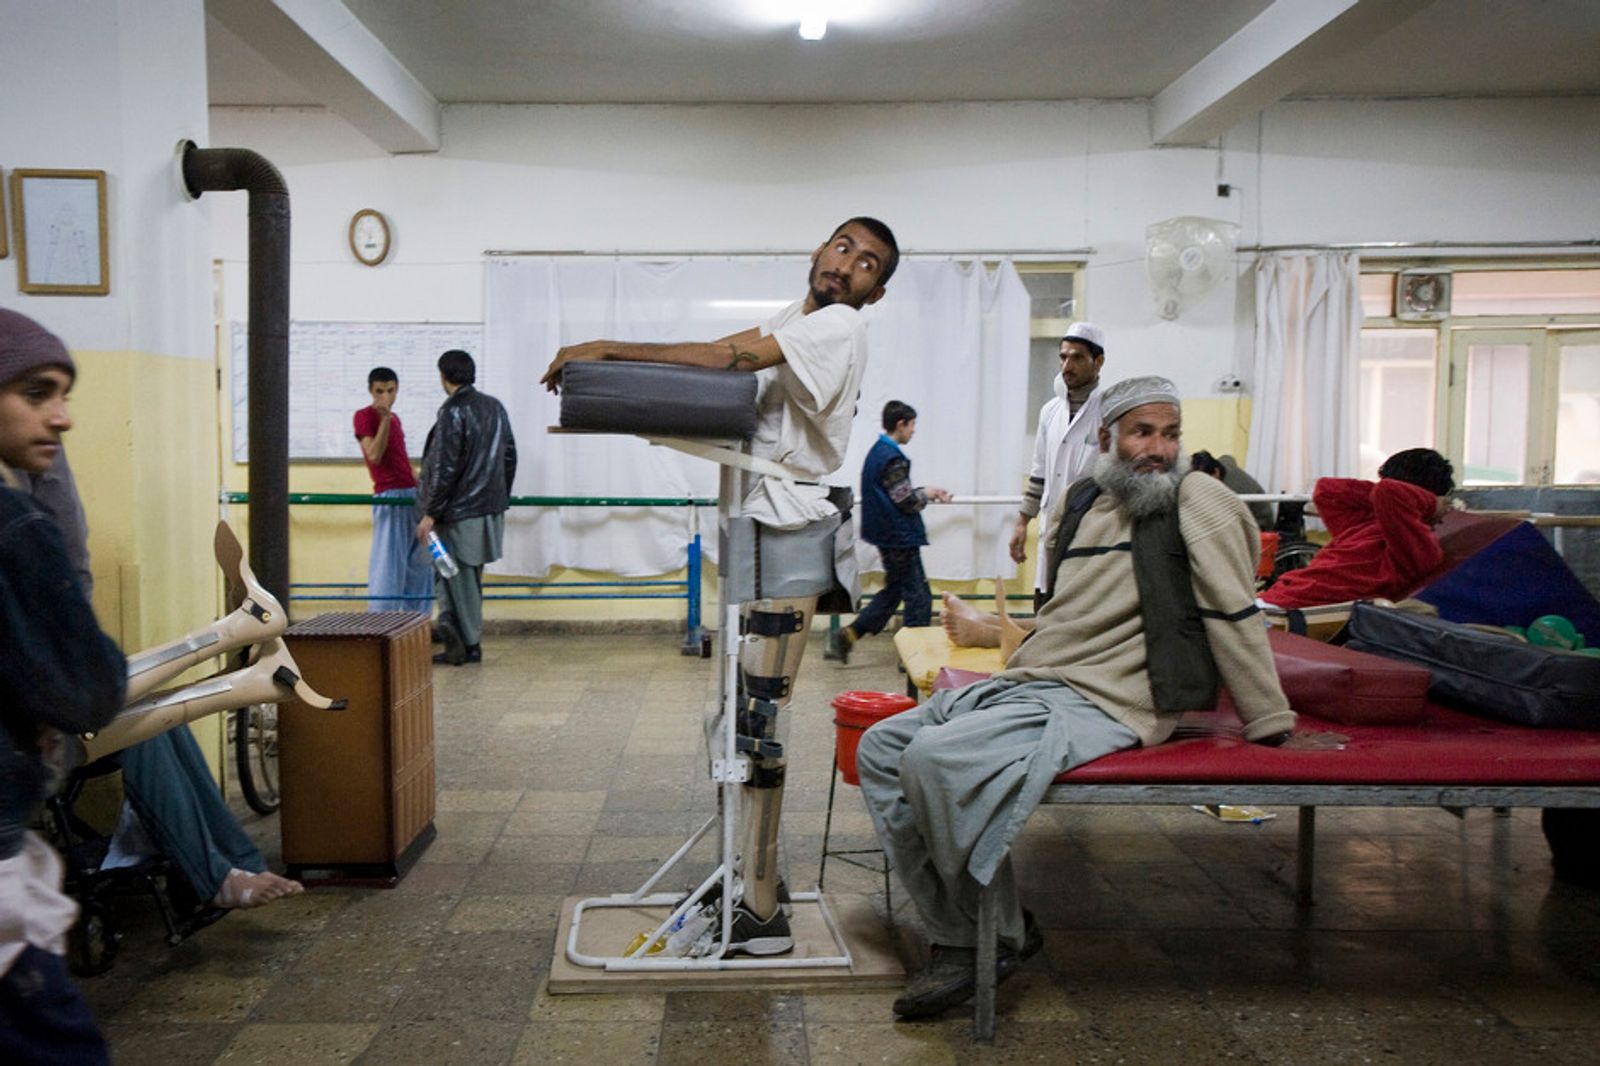 © Daniel Pilar - Patients are training to walk with prothesis in the Orthopedic Centre of the ICRC in Kabul on january 27th 2010.